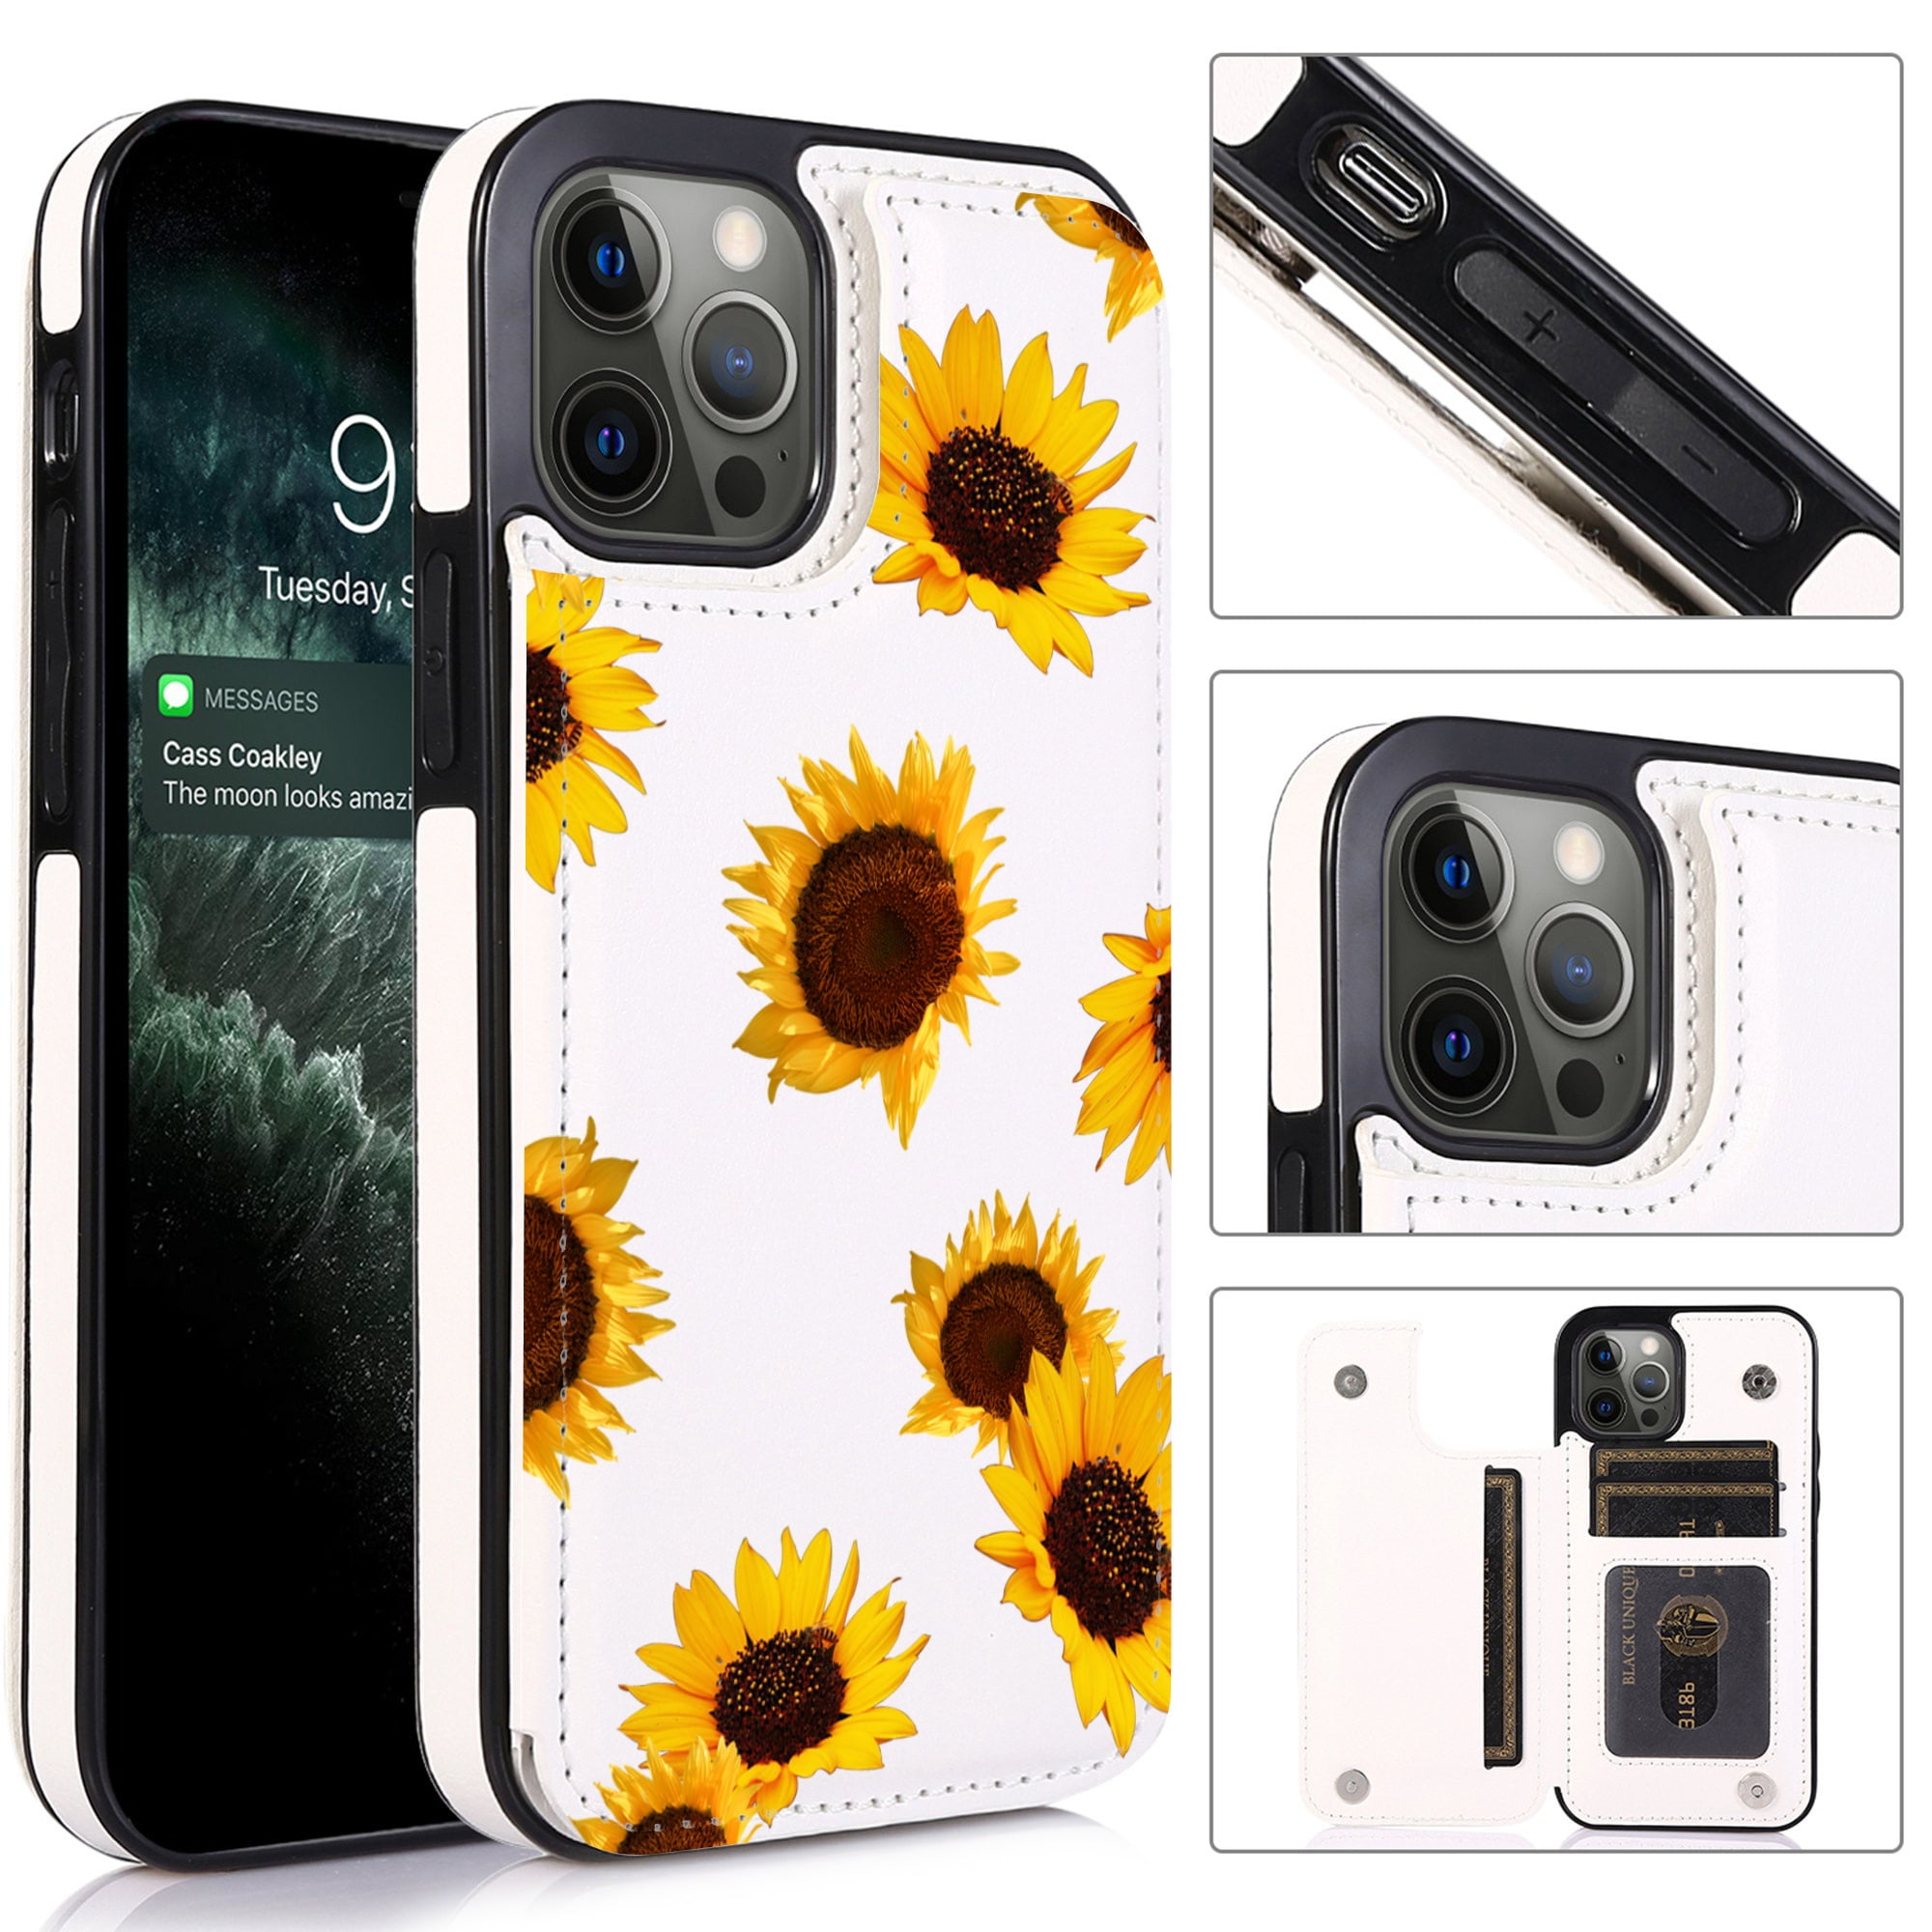 Sunflower iPhone XR Case Cute Floral Flower Elephant Back Cover Case for Girls/Women Flexible TPU Bumper Case for iPhone XR 6.1 inch 